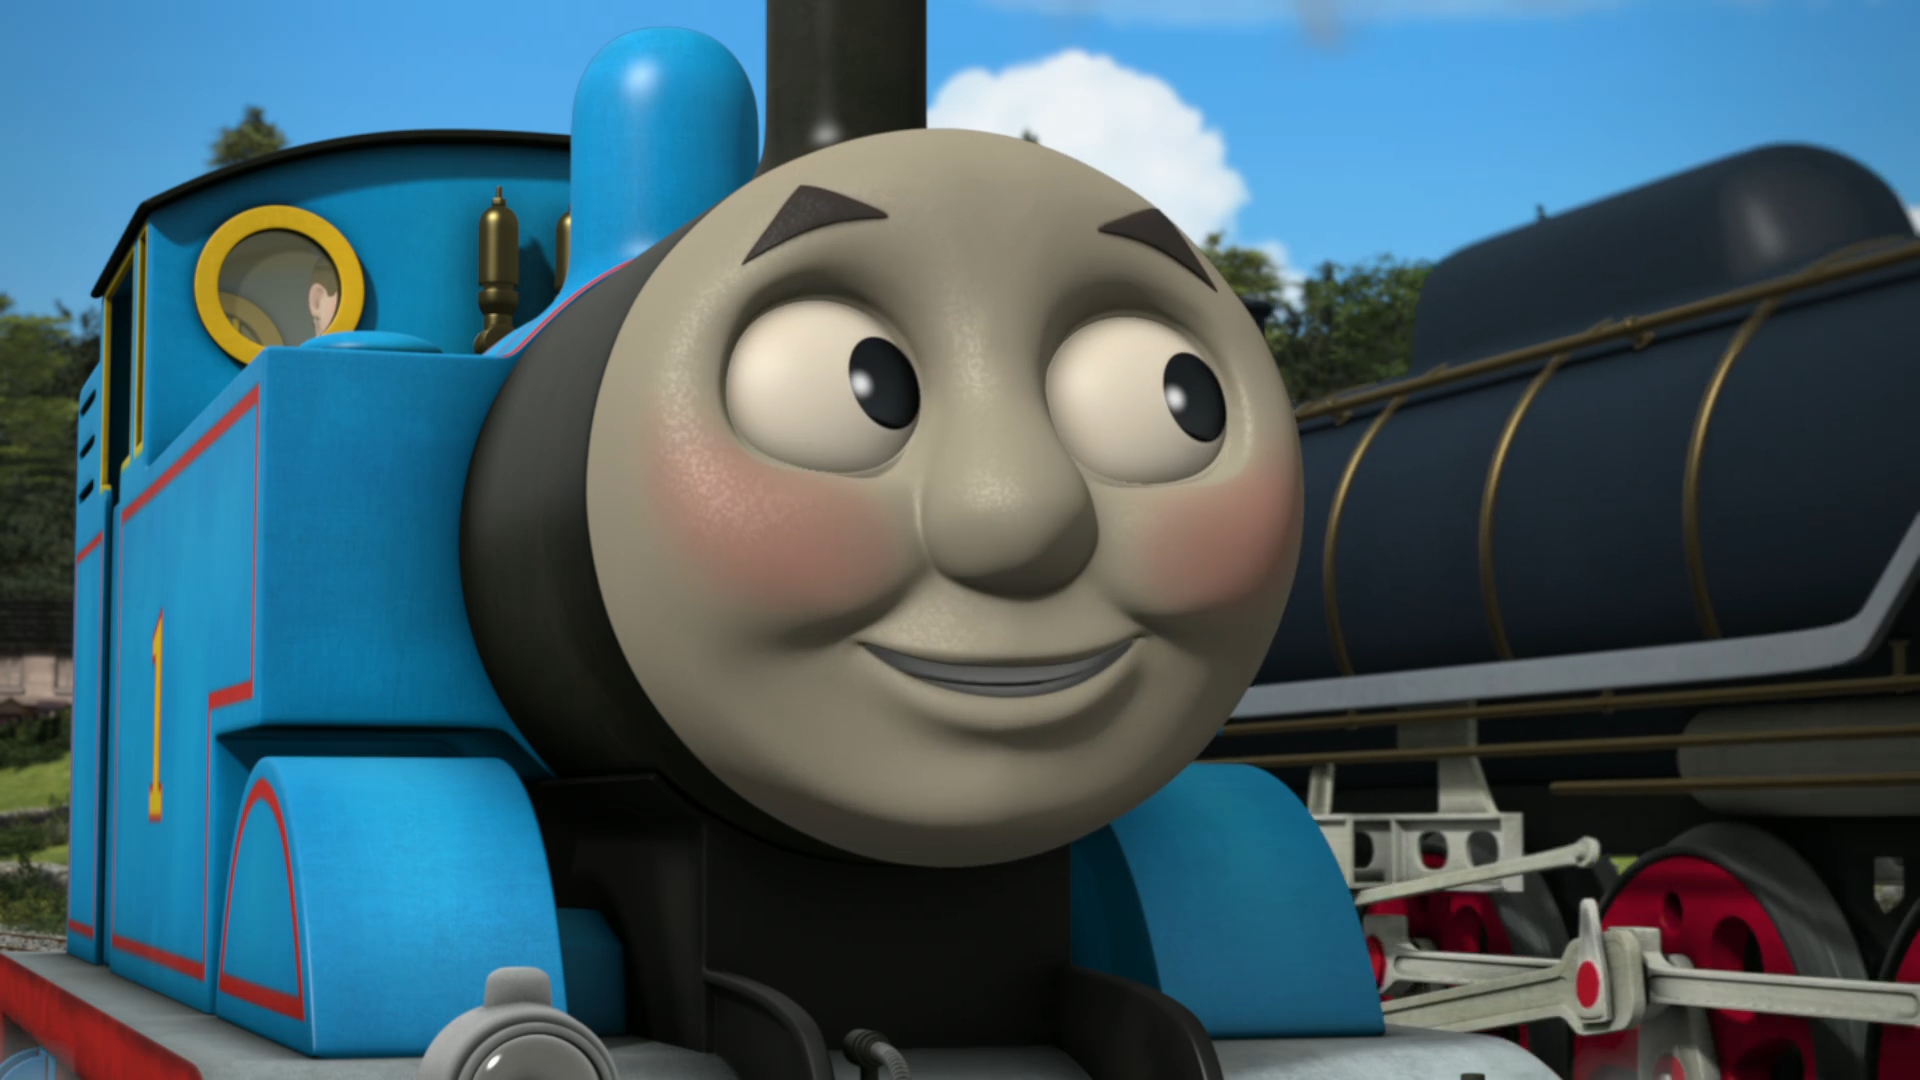 Thomas The Tank Engine And Friends Wikia